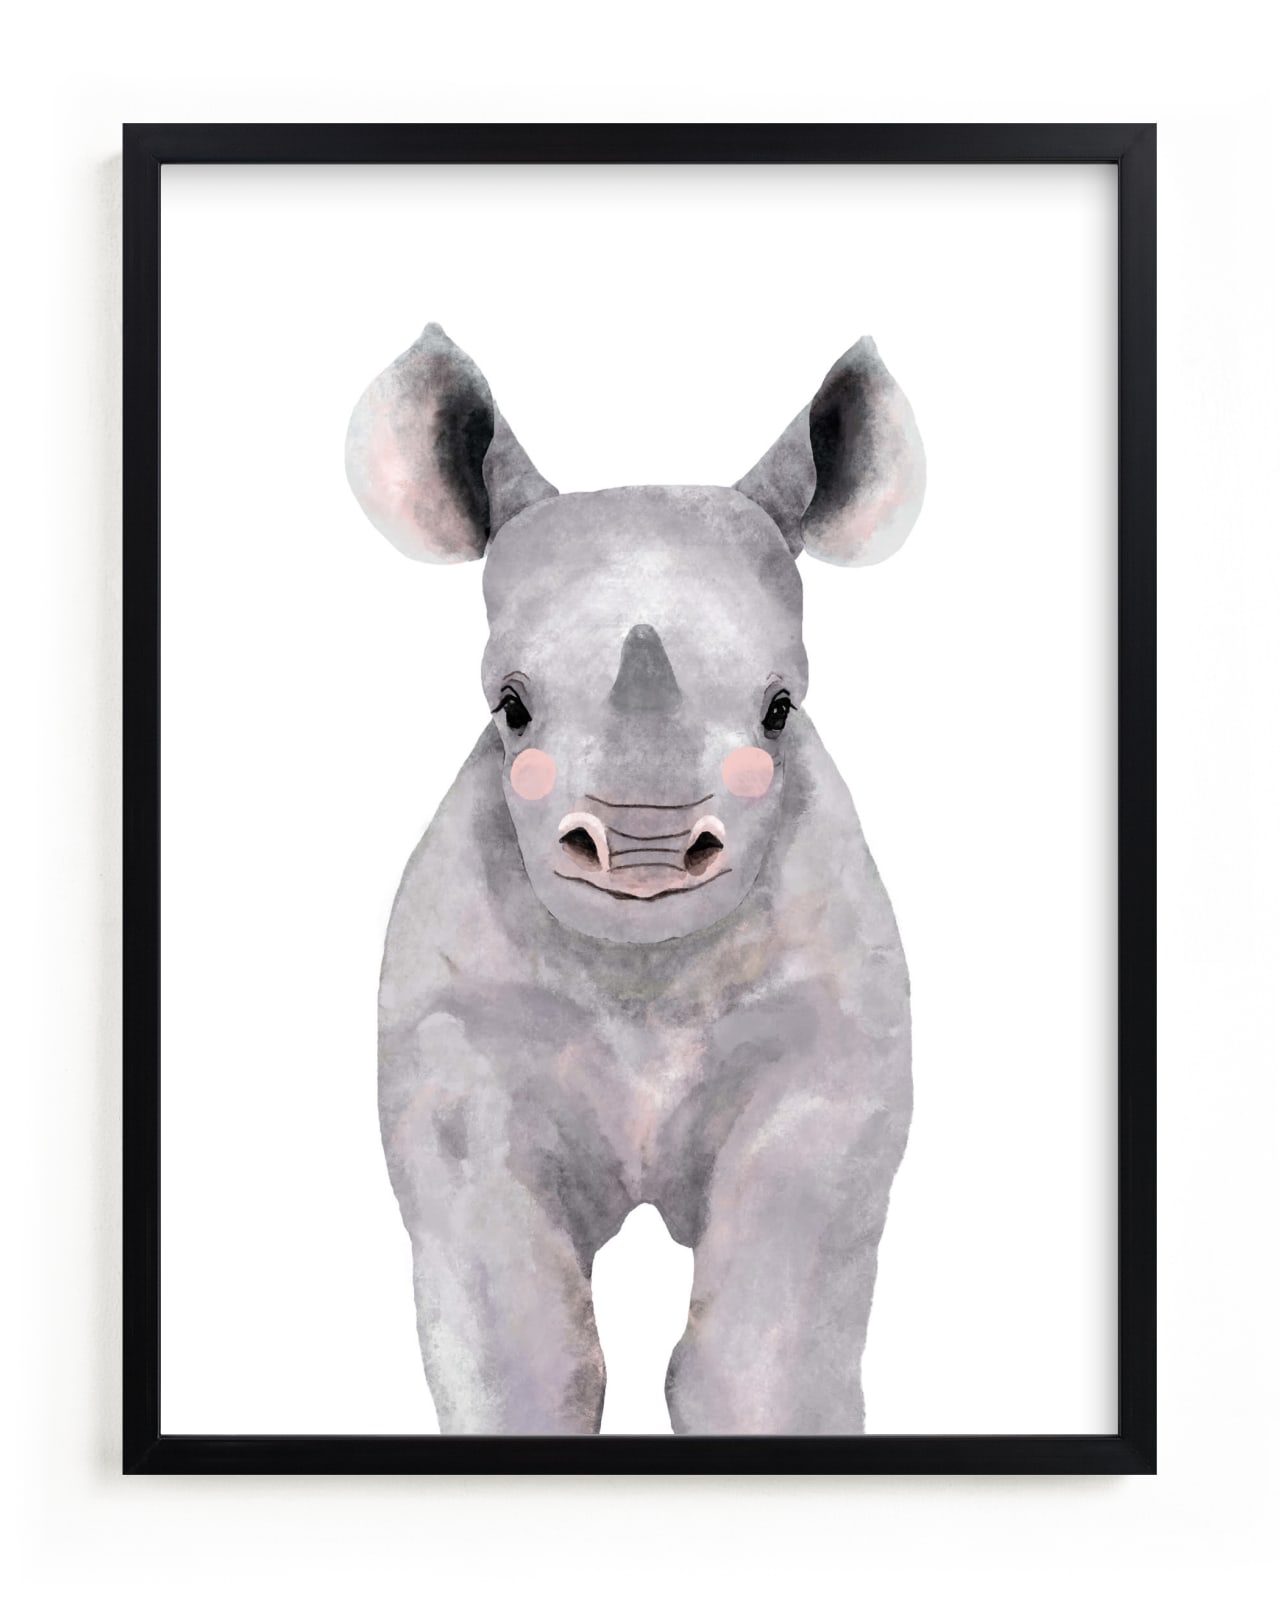 This is a purple kids wall art by Cass Loh called Baby Animal Rhinoceros.